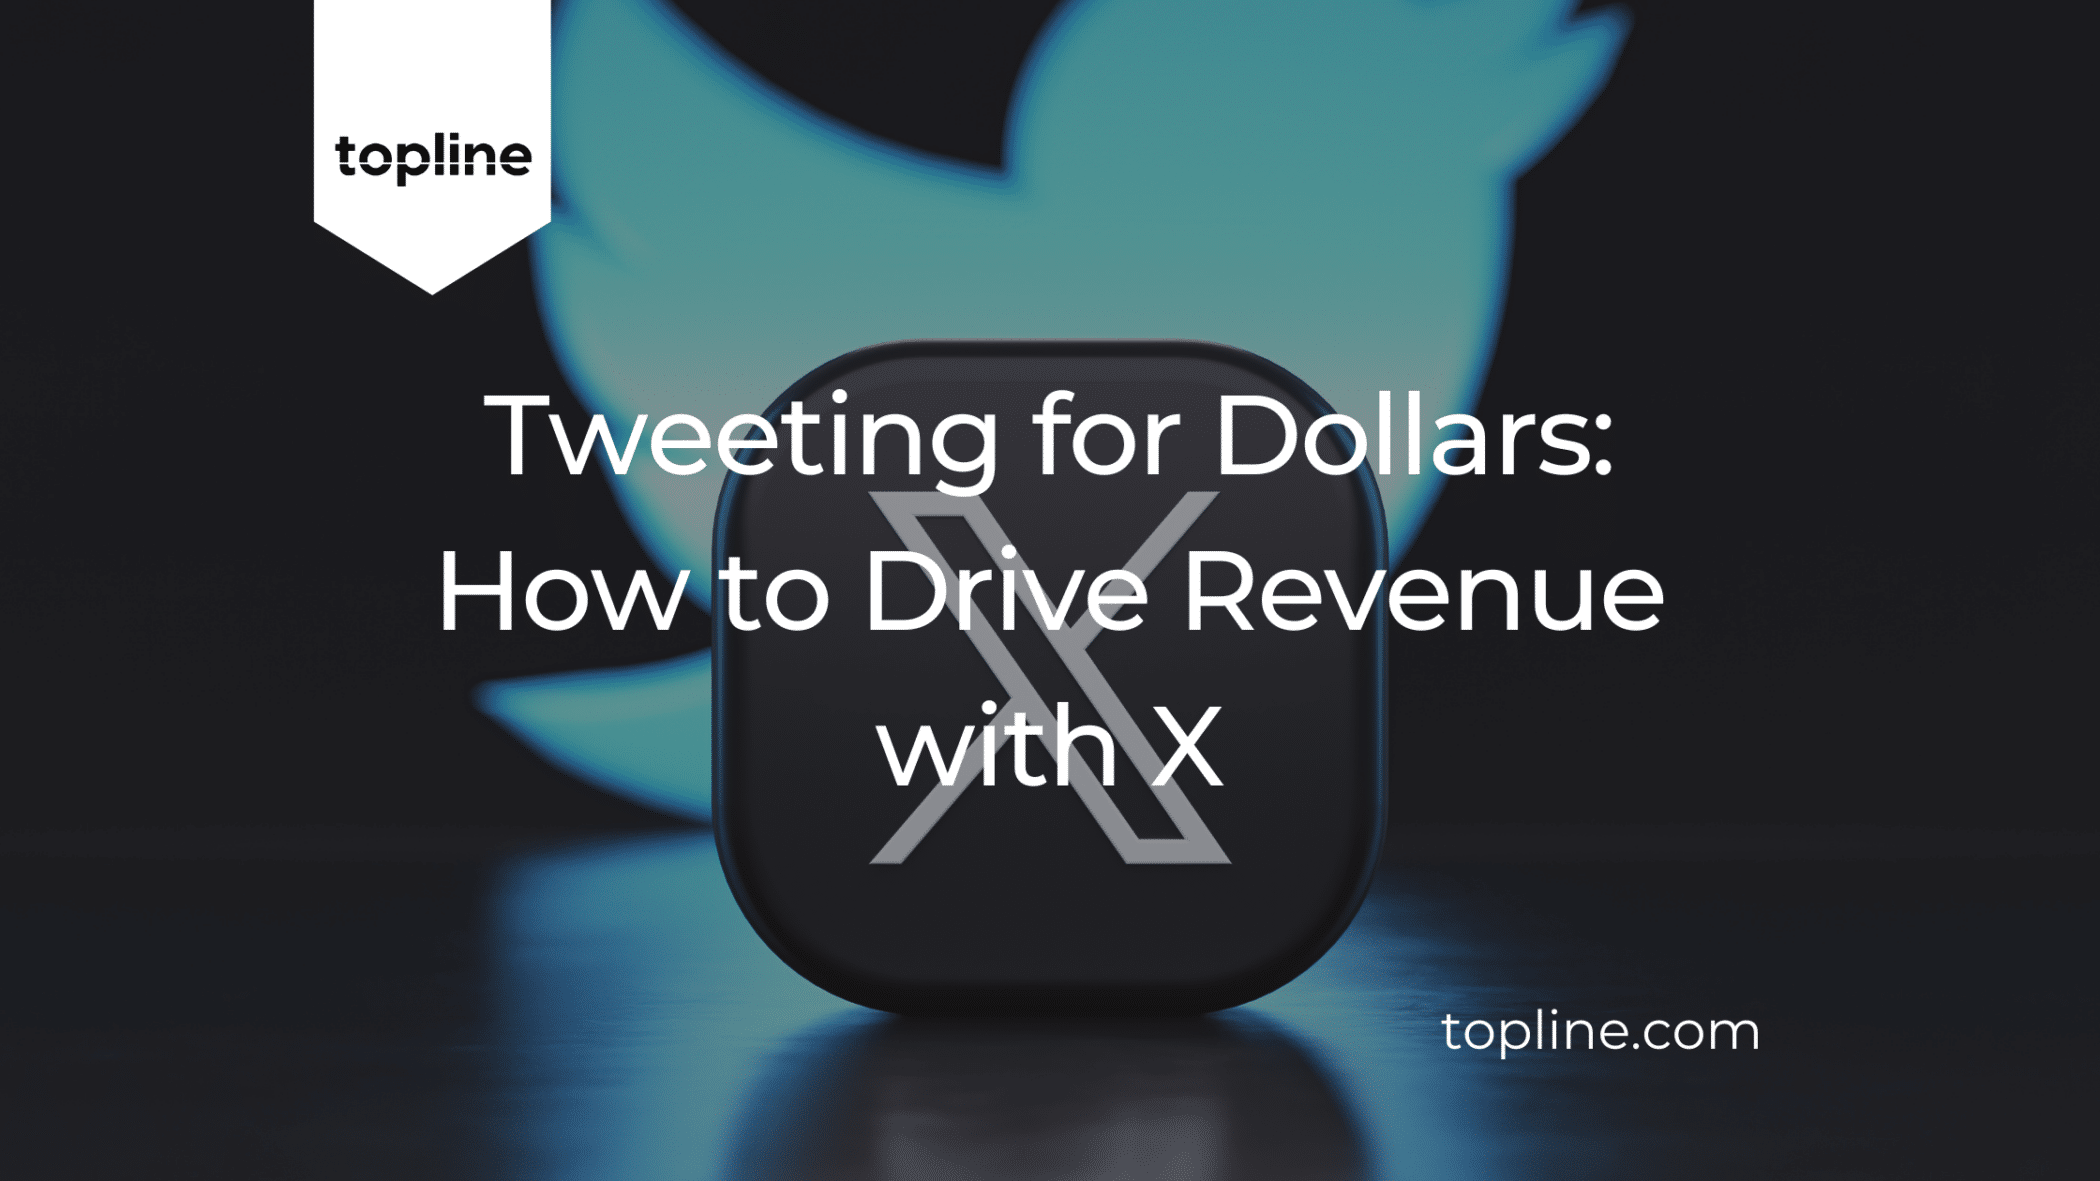 Tweeting for Dollars: How to Drive Revenue with X (Twitter)